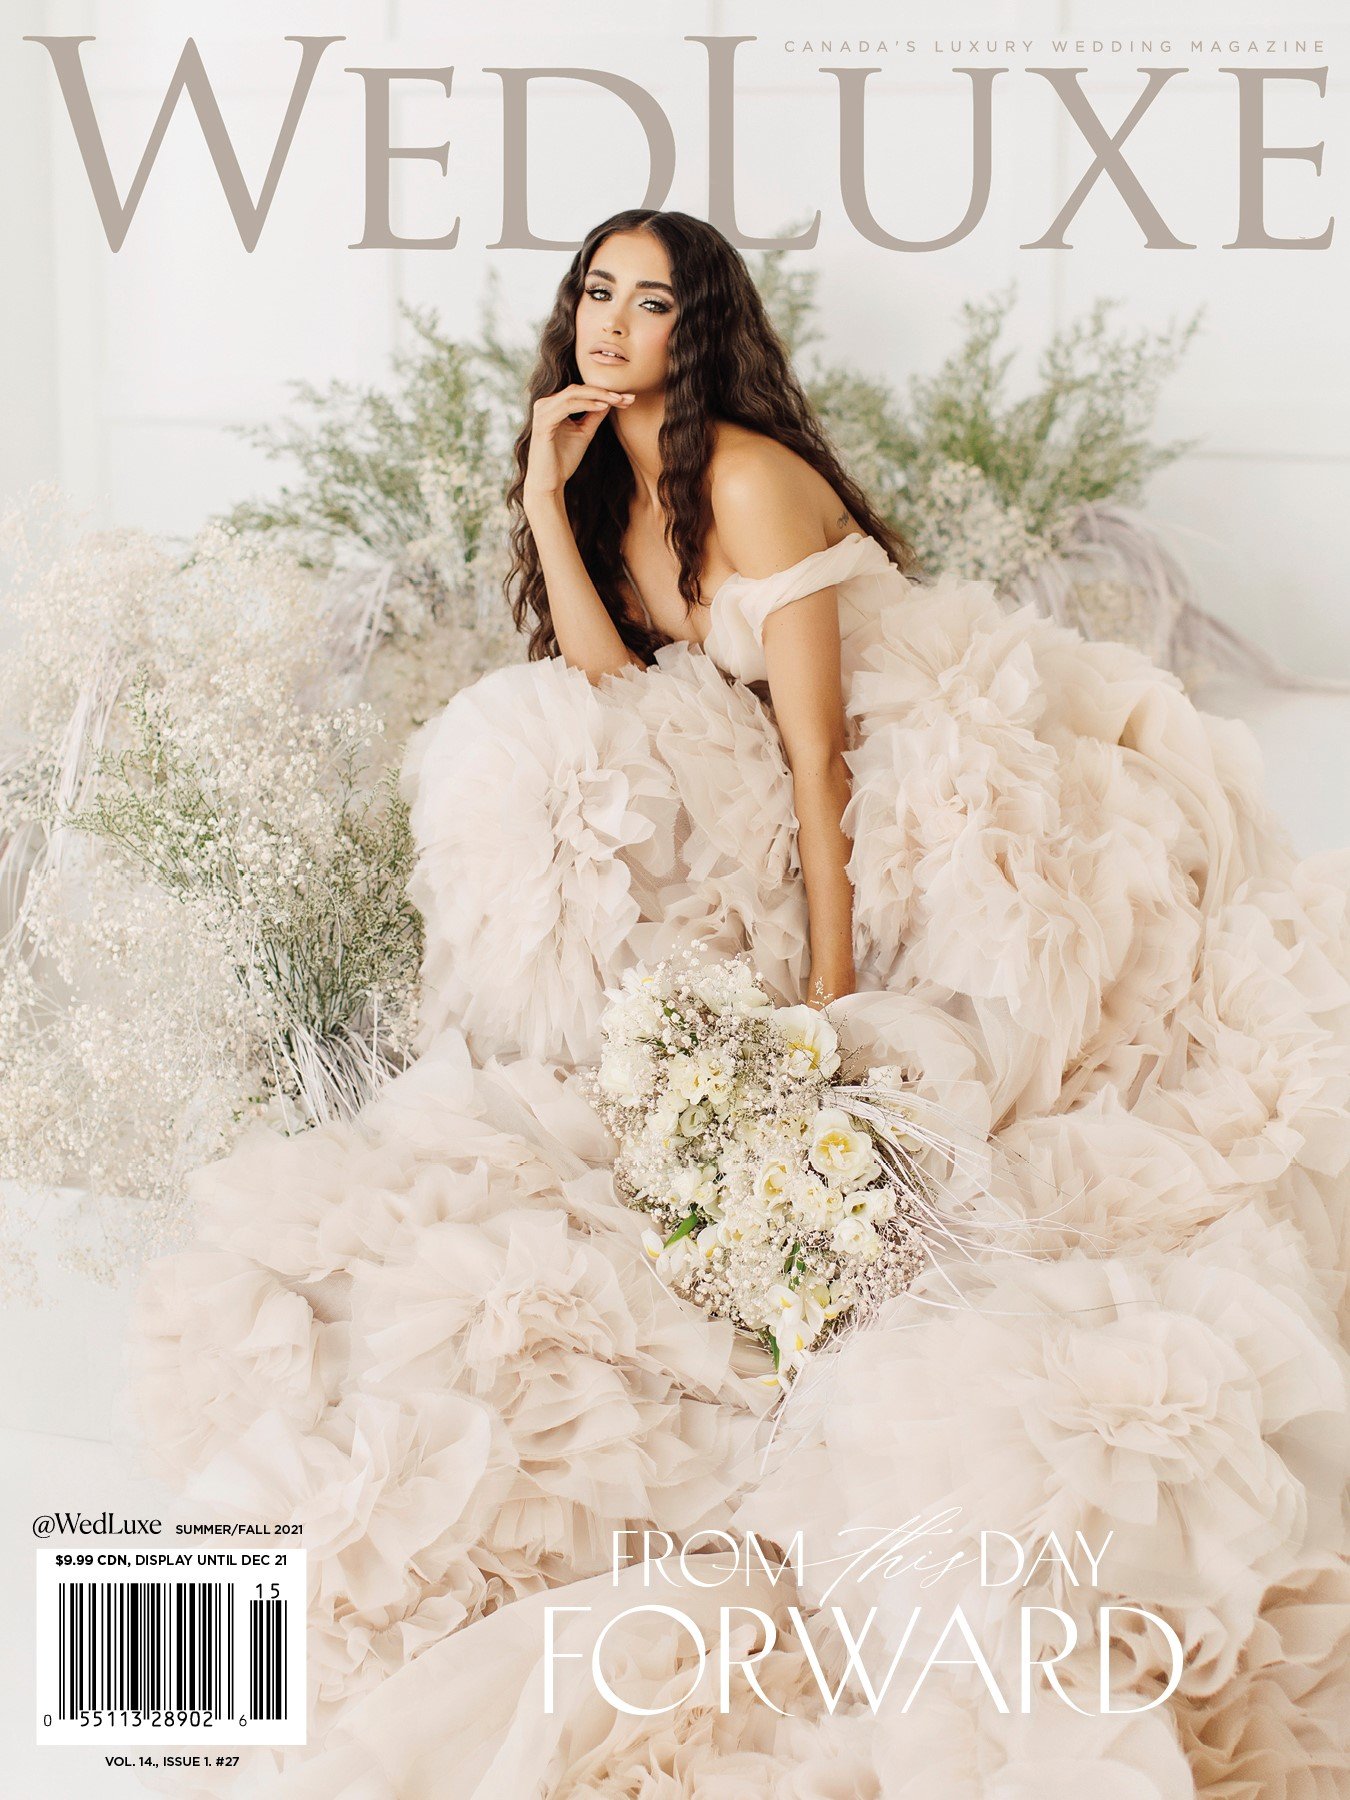 wedluxe-2021-cover-diana-pires-event.jpeg